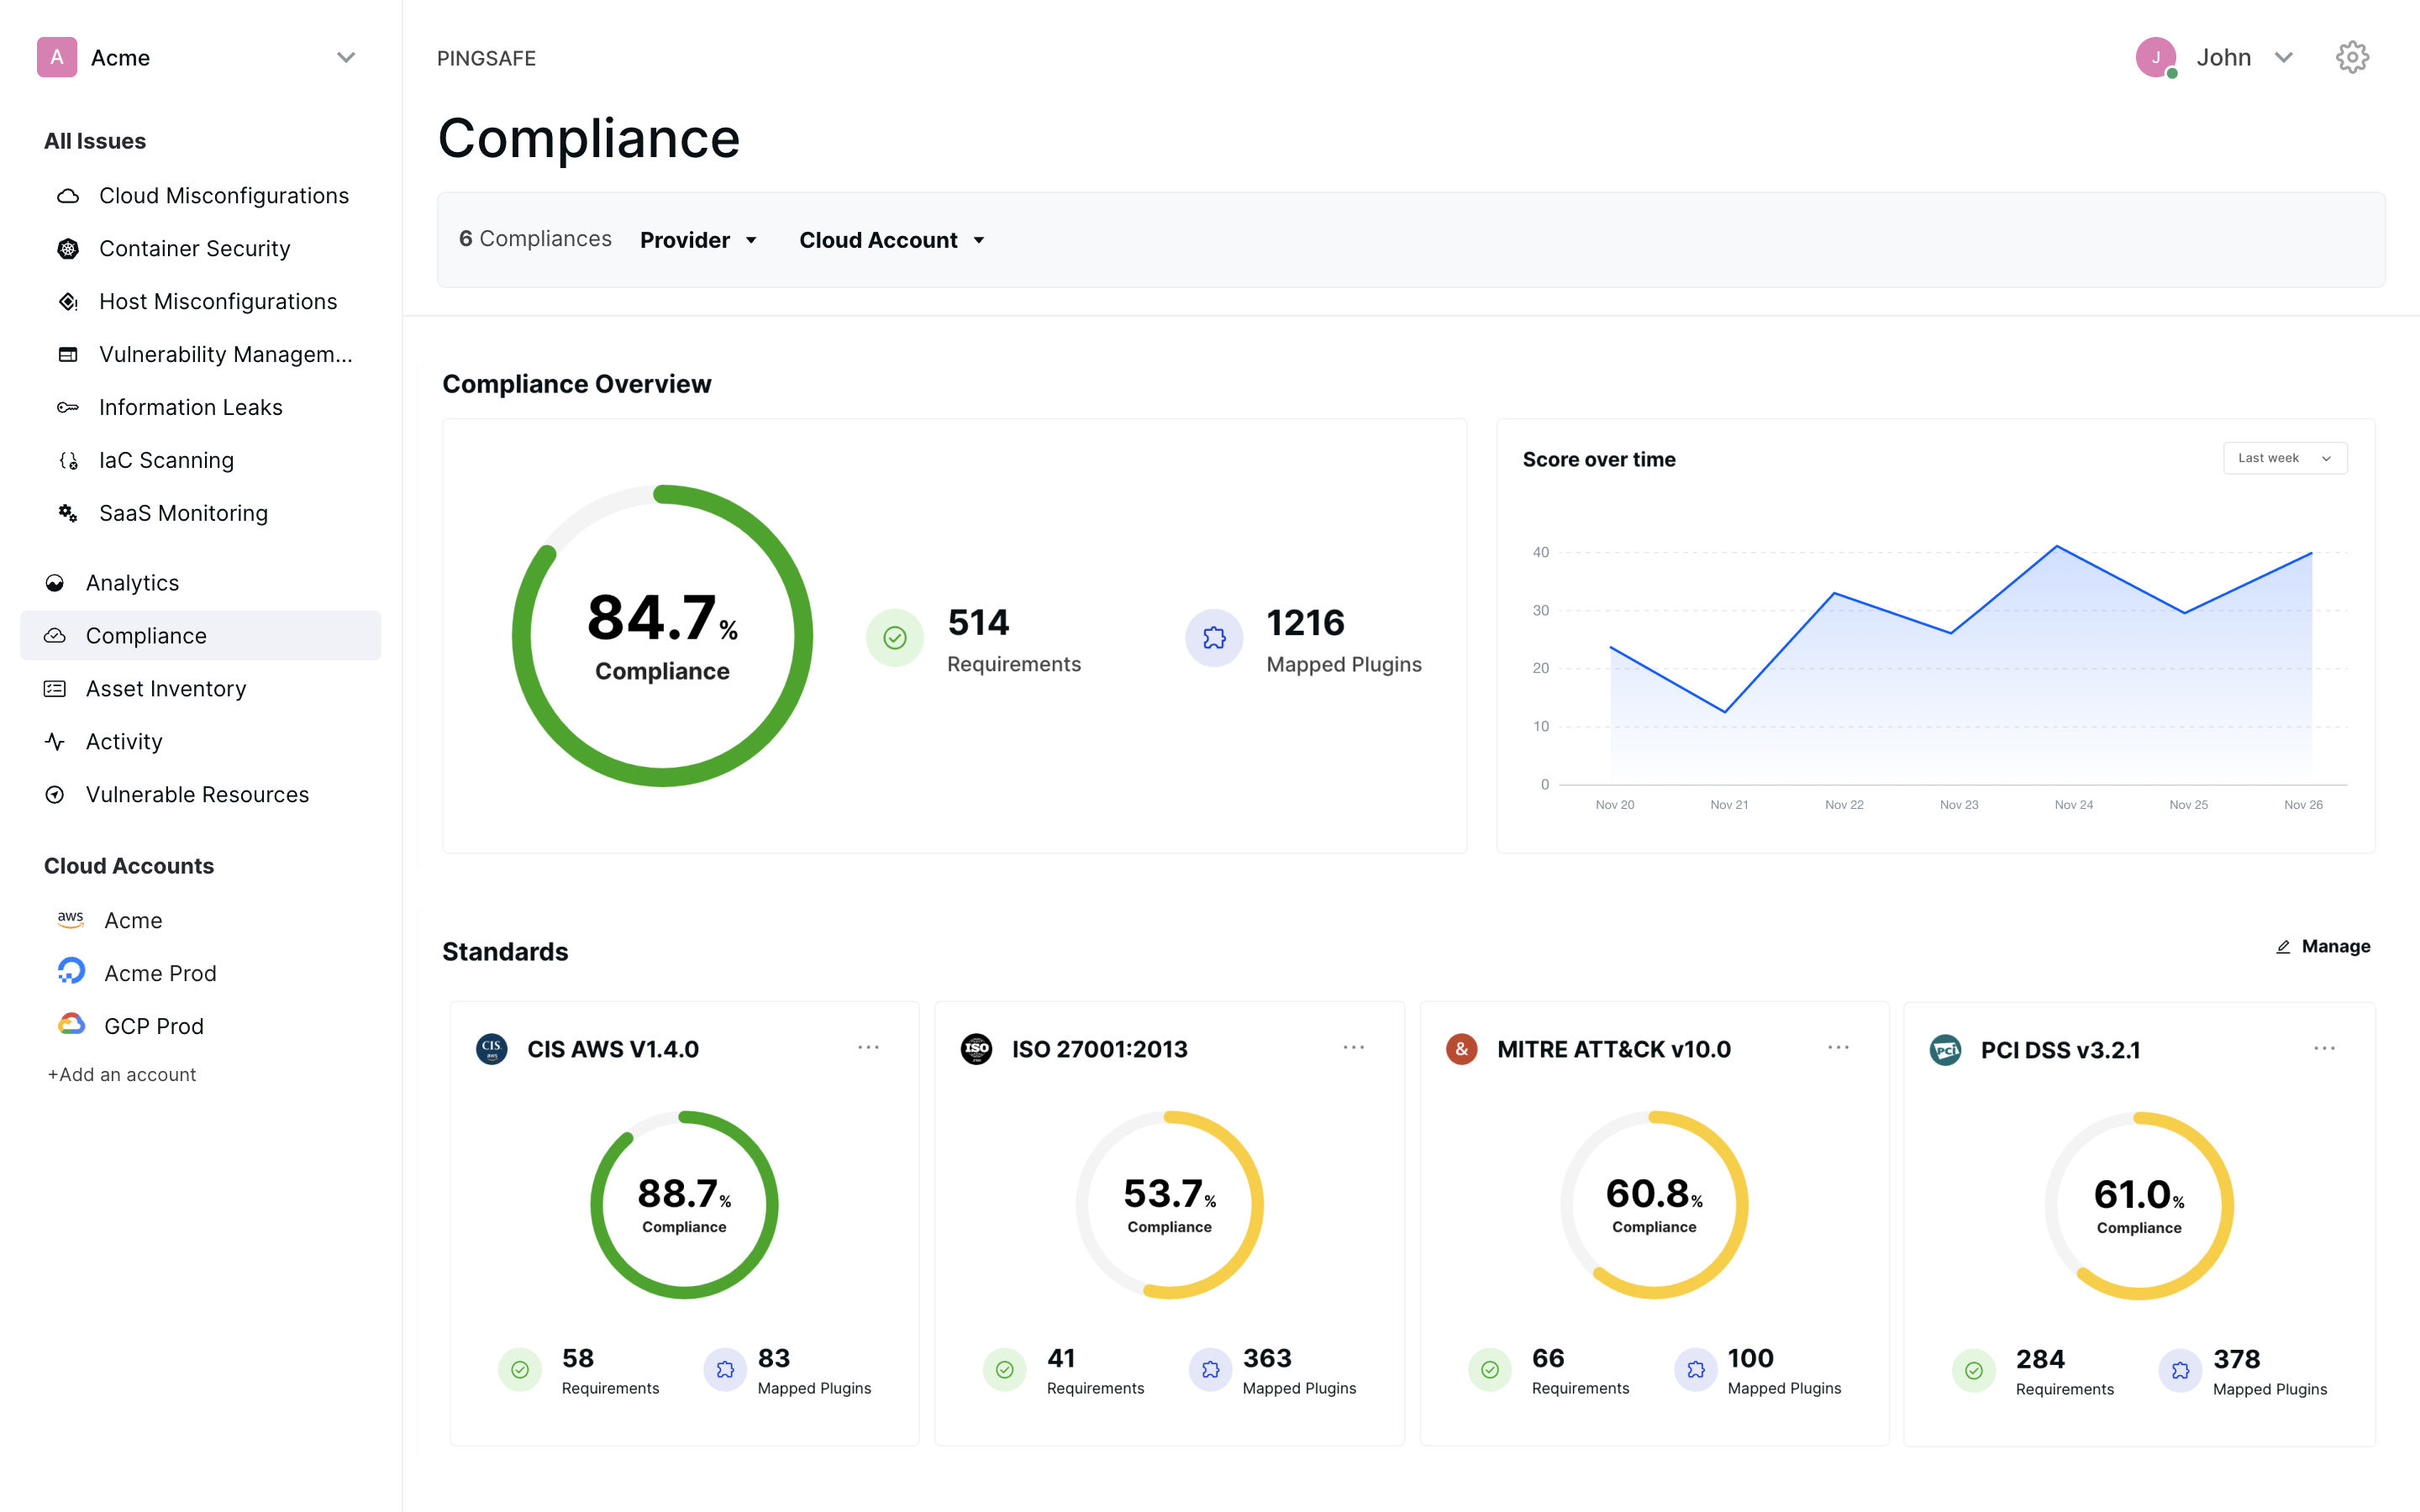 Get a centralized and comprehensive compliance dashboard to monitor and visualize your compliance scores and policies across AWS, GCP, and Microsoft Azure.